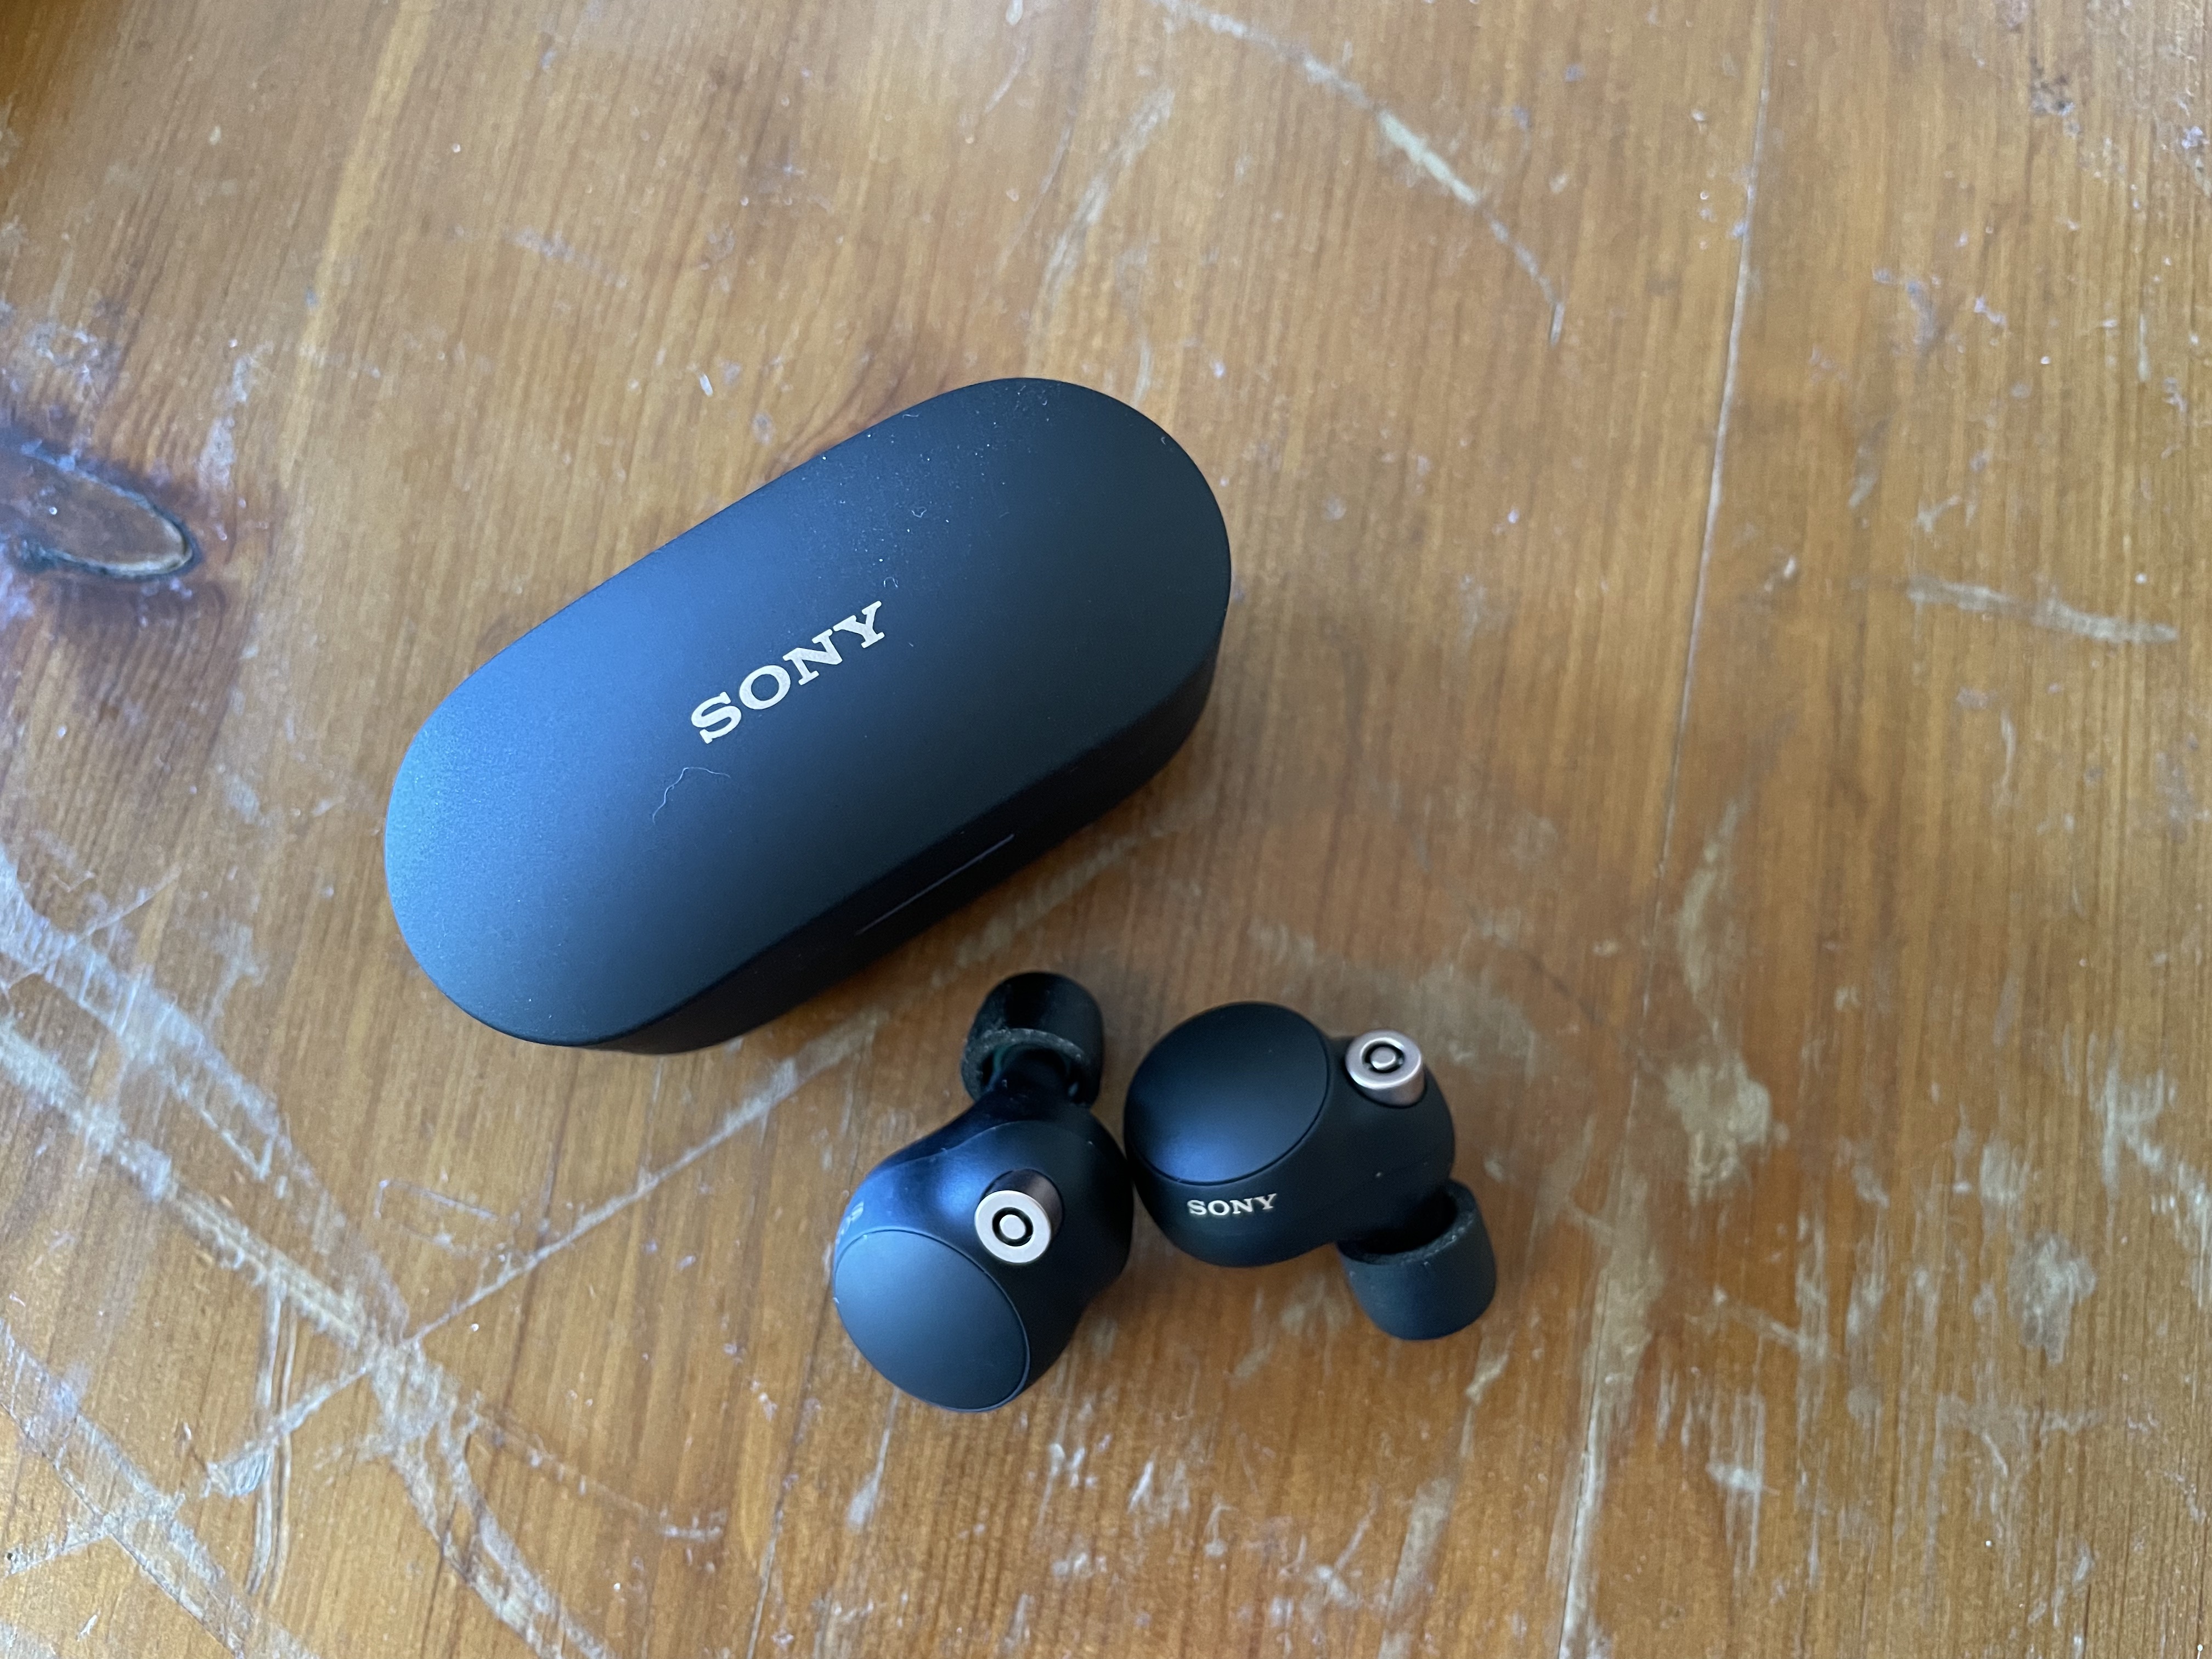 Sony WF-1000XM4 Earbuds Review: the Best Wireless Earbuds You Can Buy